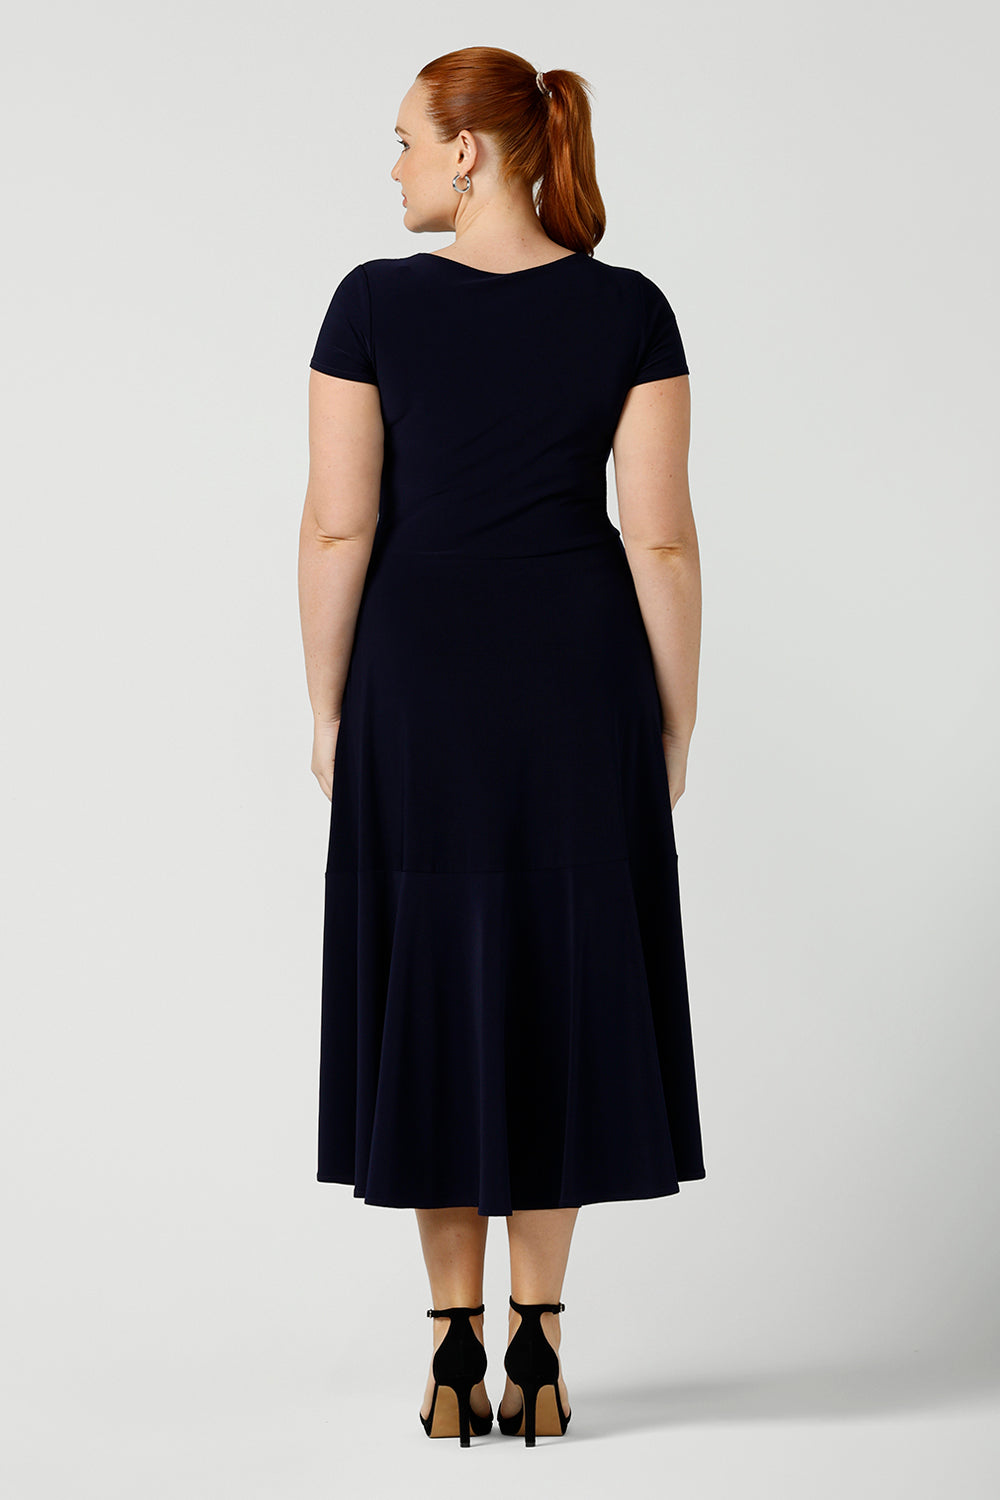 Back view of an Australian-made navy dress in size 12, shown for curvy. This high neck, short sleeve dress with flared skirt and ruffle hemline is a good workwear dress as well as a classic cocktail dress. With a middi-length skirt, shop this dress in plus sizes as well as petite thanks to made-in-Australia women's clothing brand, Lena & Fleur.